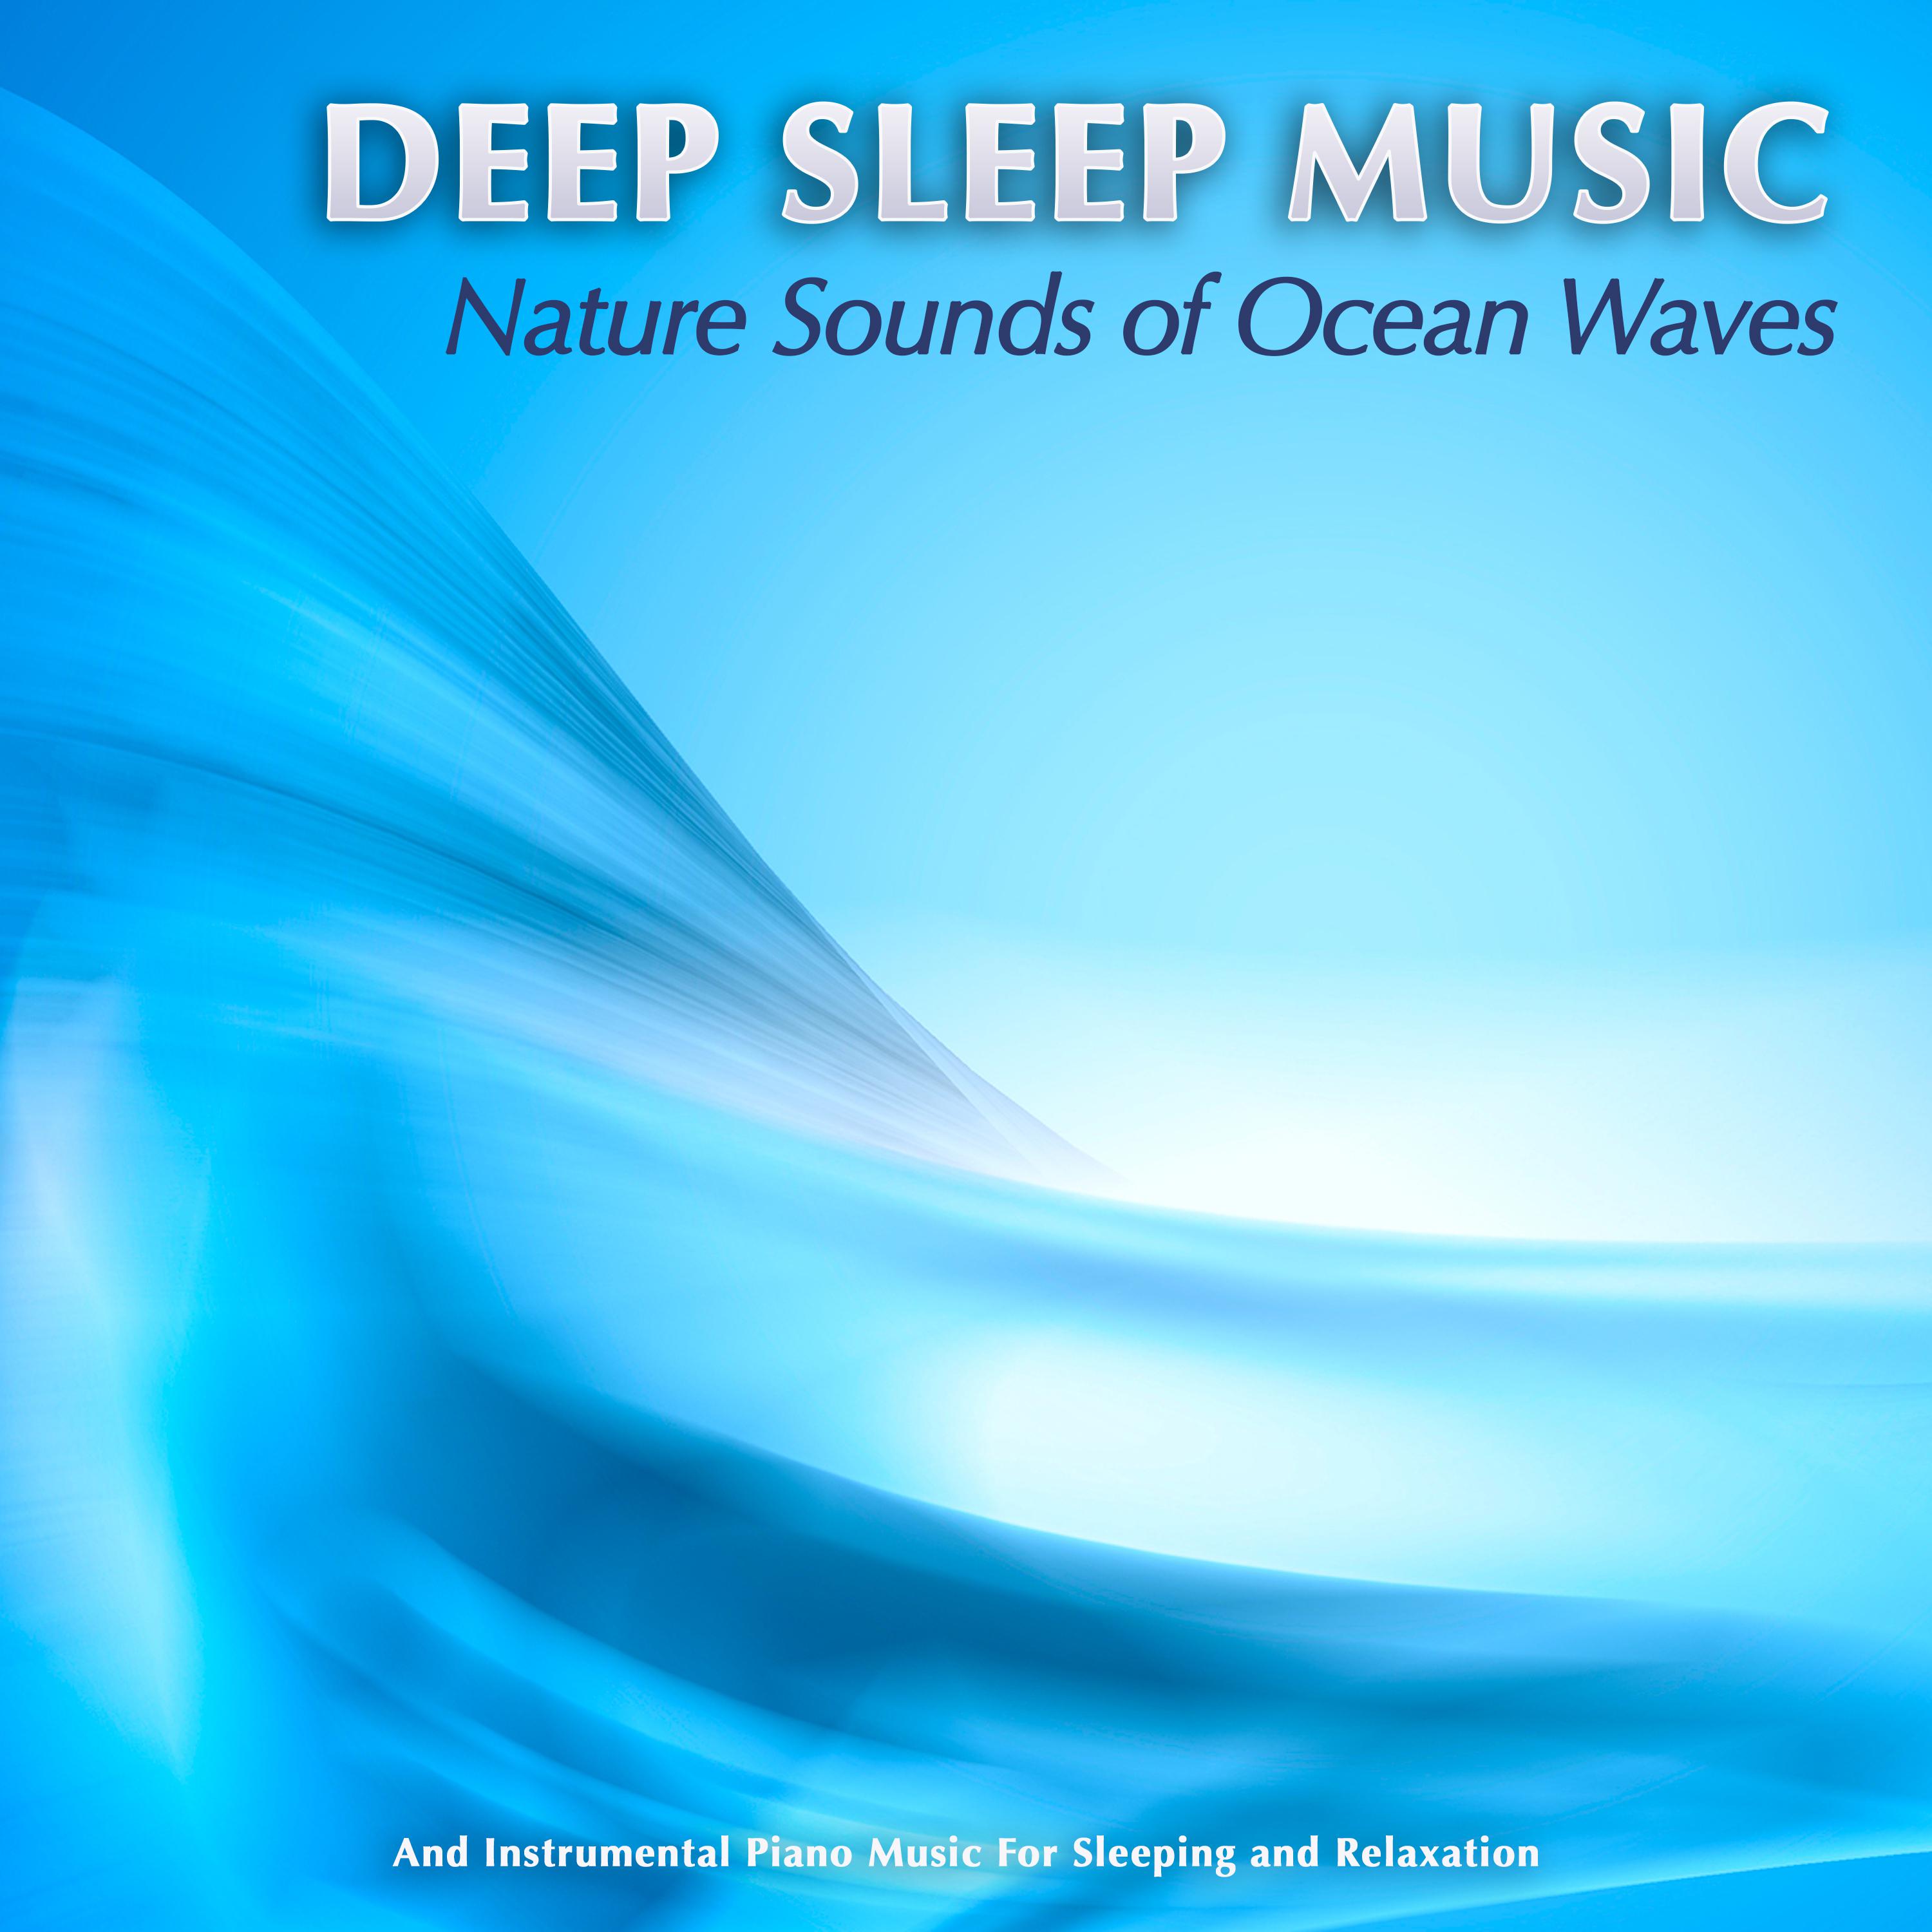 Tranquil Piano Music with Ocean Waves